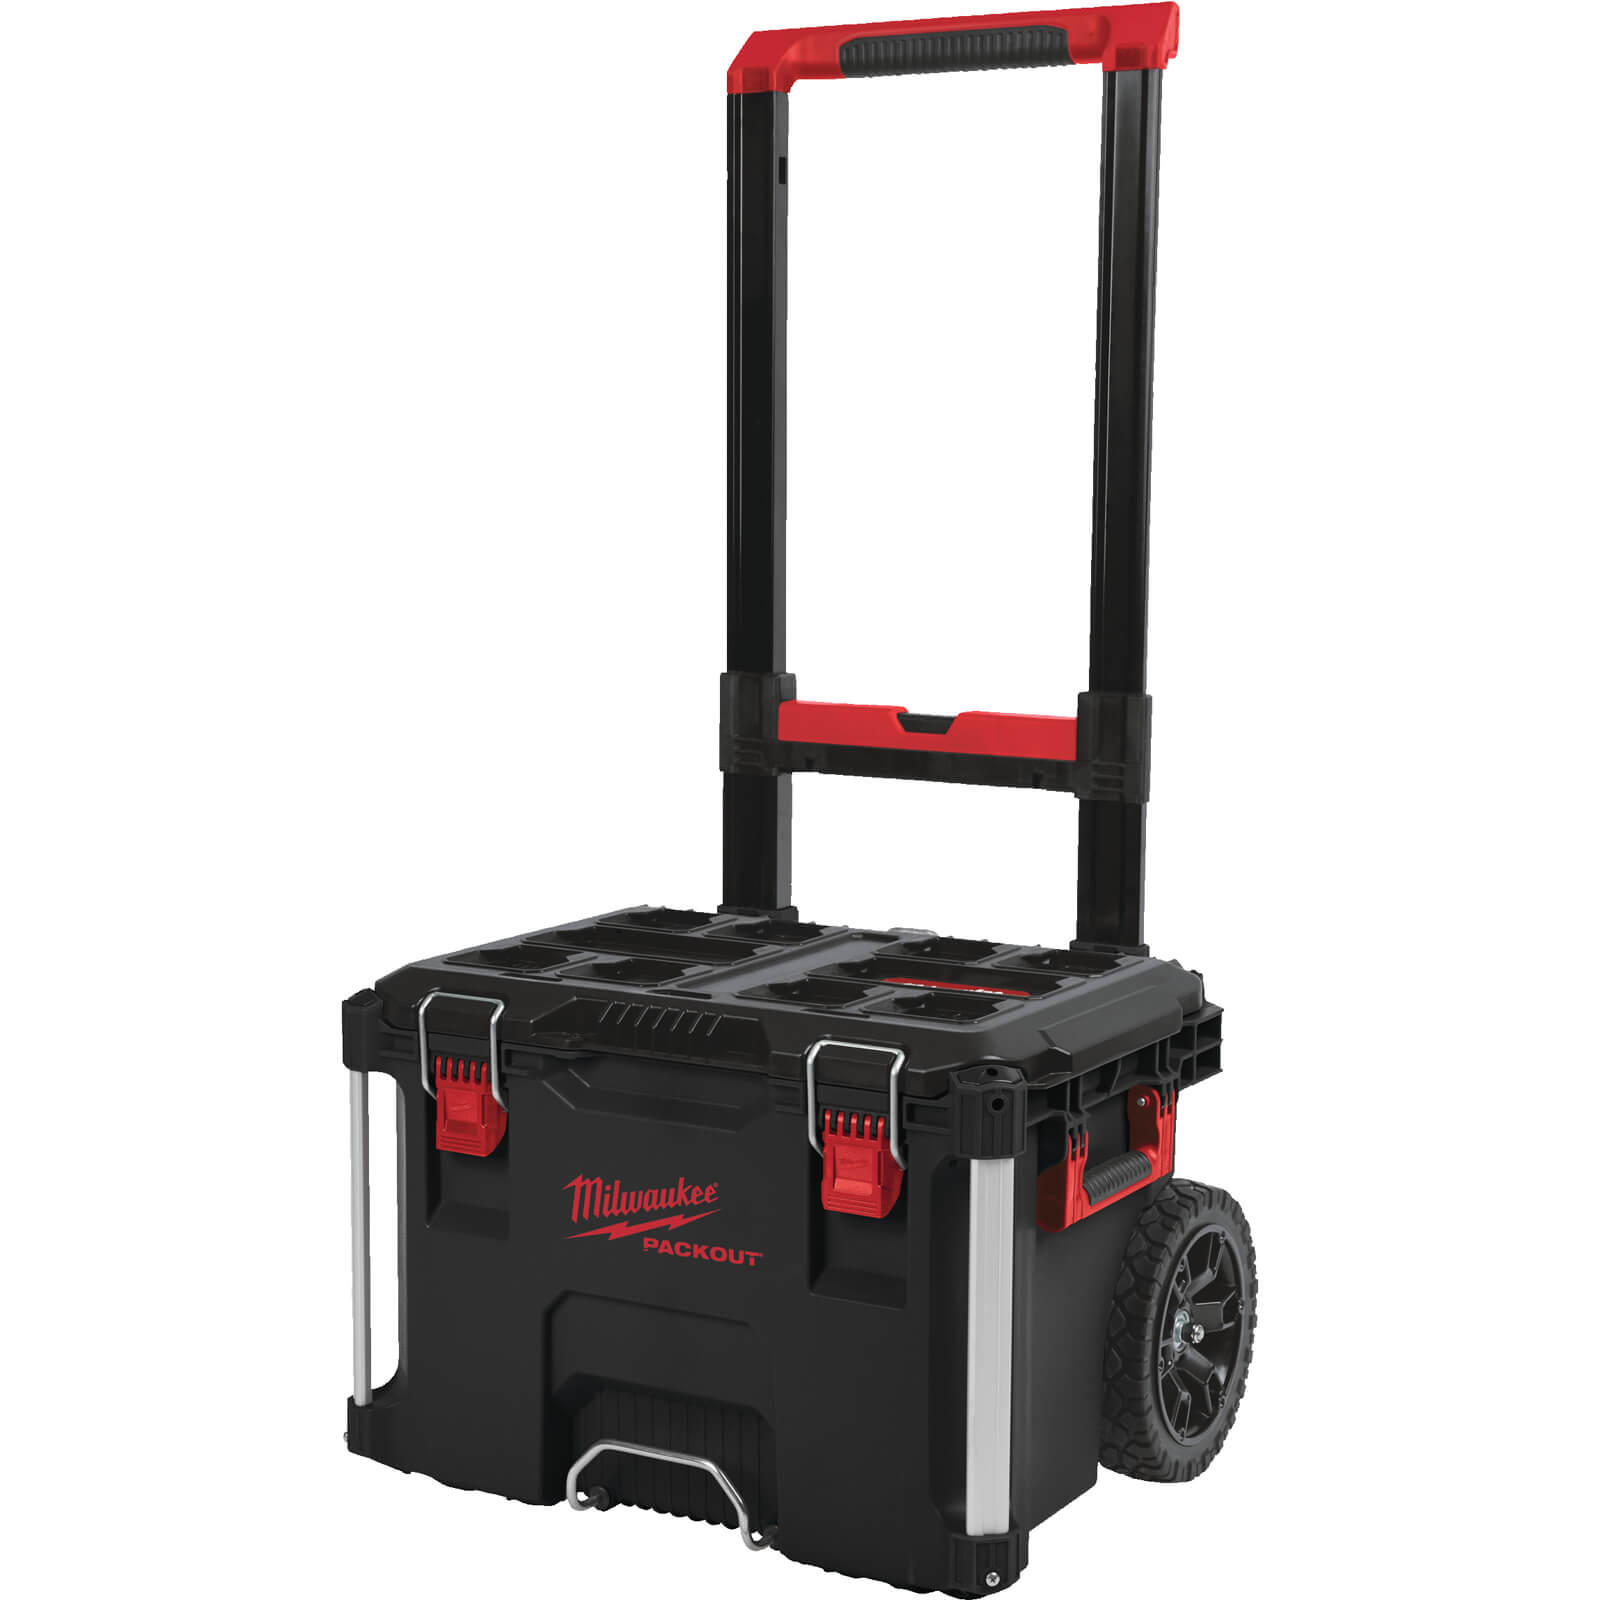 Image of Milwaukee Packout Trolley Tool Box